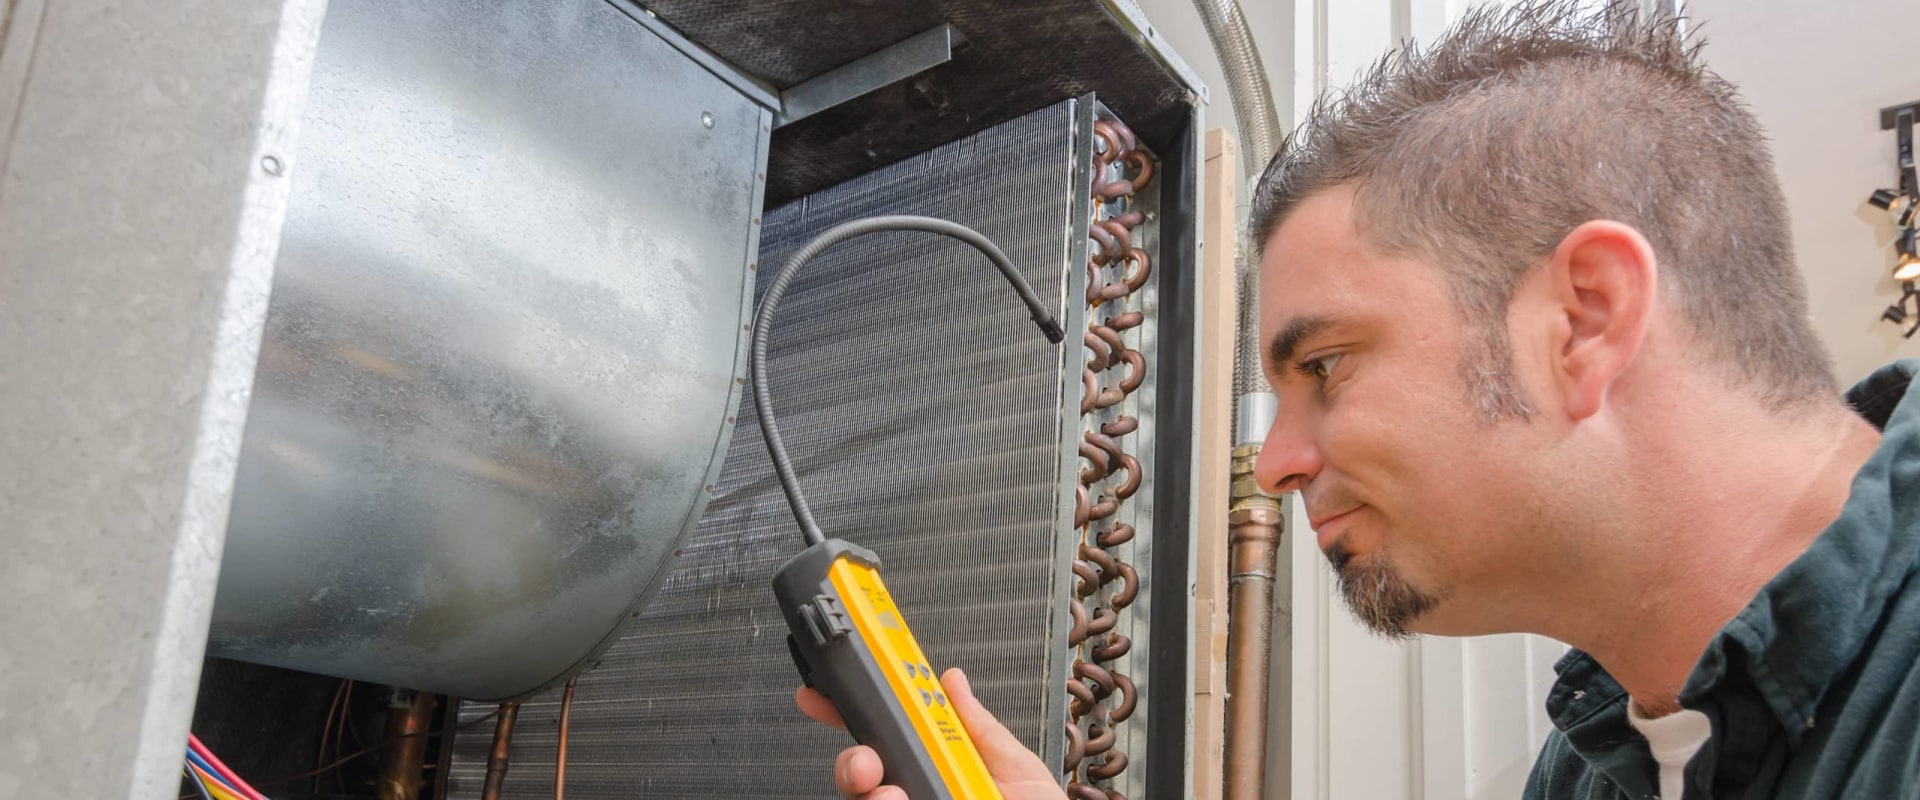 Essential Tools and Equipment for an HVAC Tune Up Service